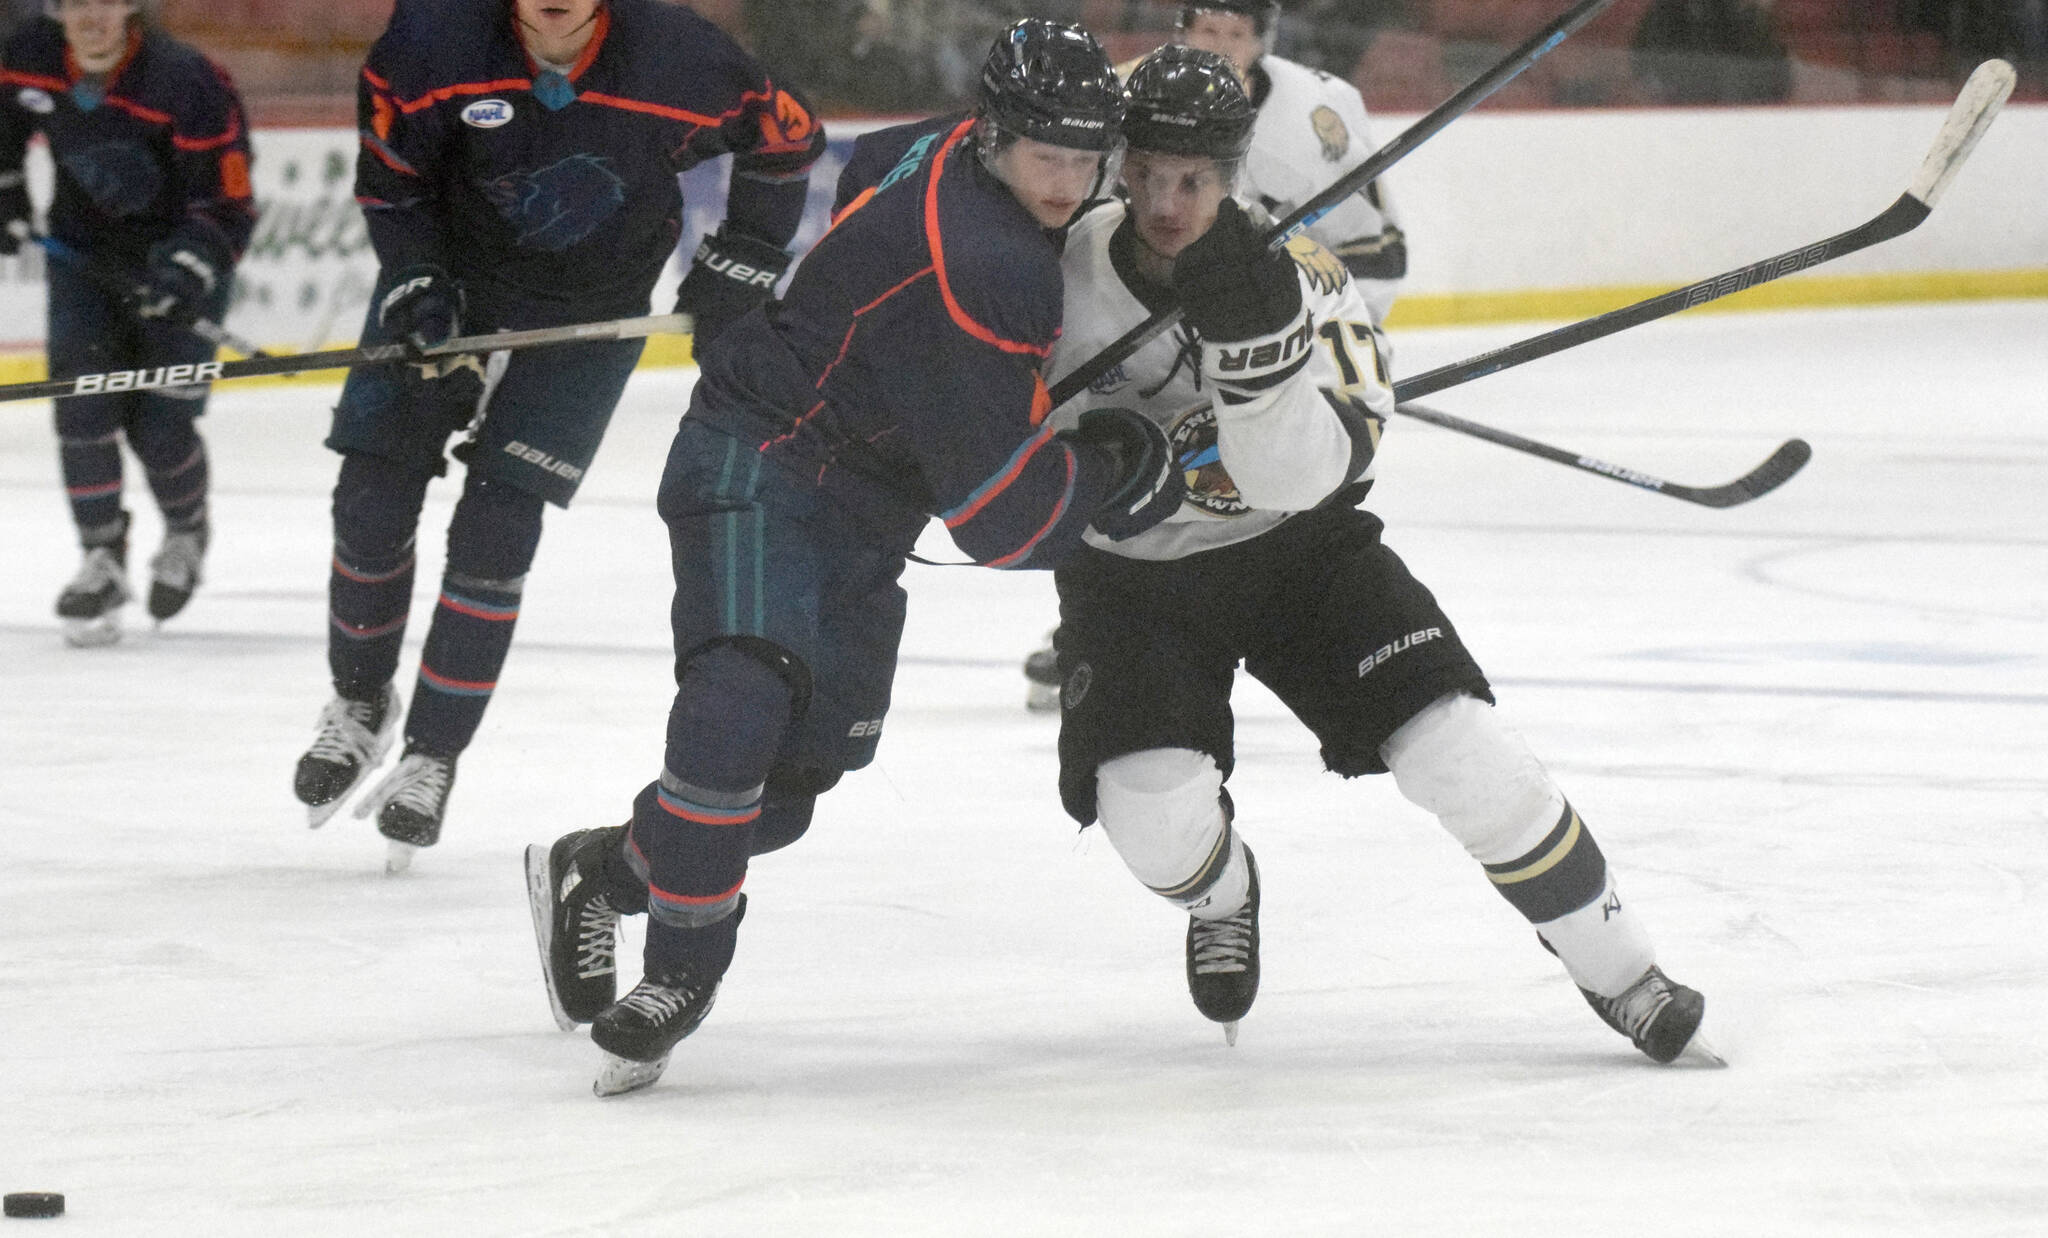 Anchorage Wolverines defenseman Danny Reis and Kenai River Brown Bears defenseman Carter Green battle for the puck Friday at the Soldotna Regional Sports Complex in Soldotna. (Photo by Jeff Helminiak/Peninsula Clarion)